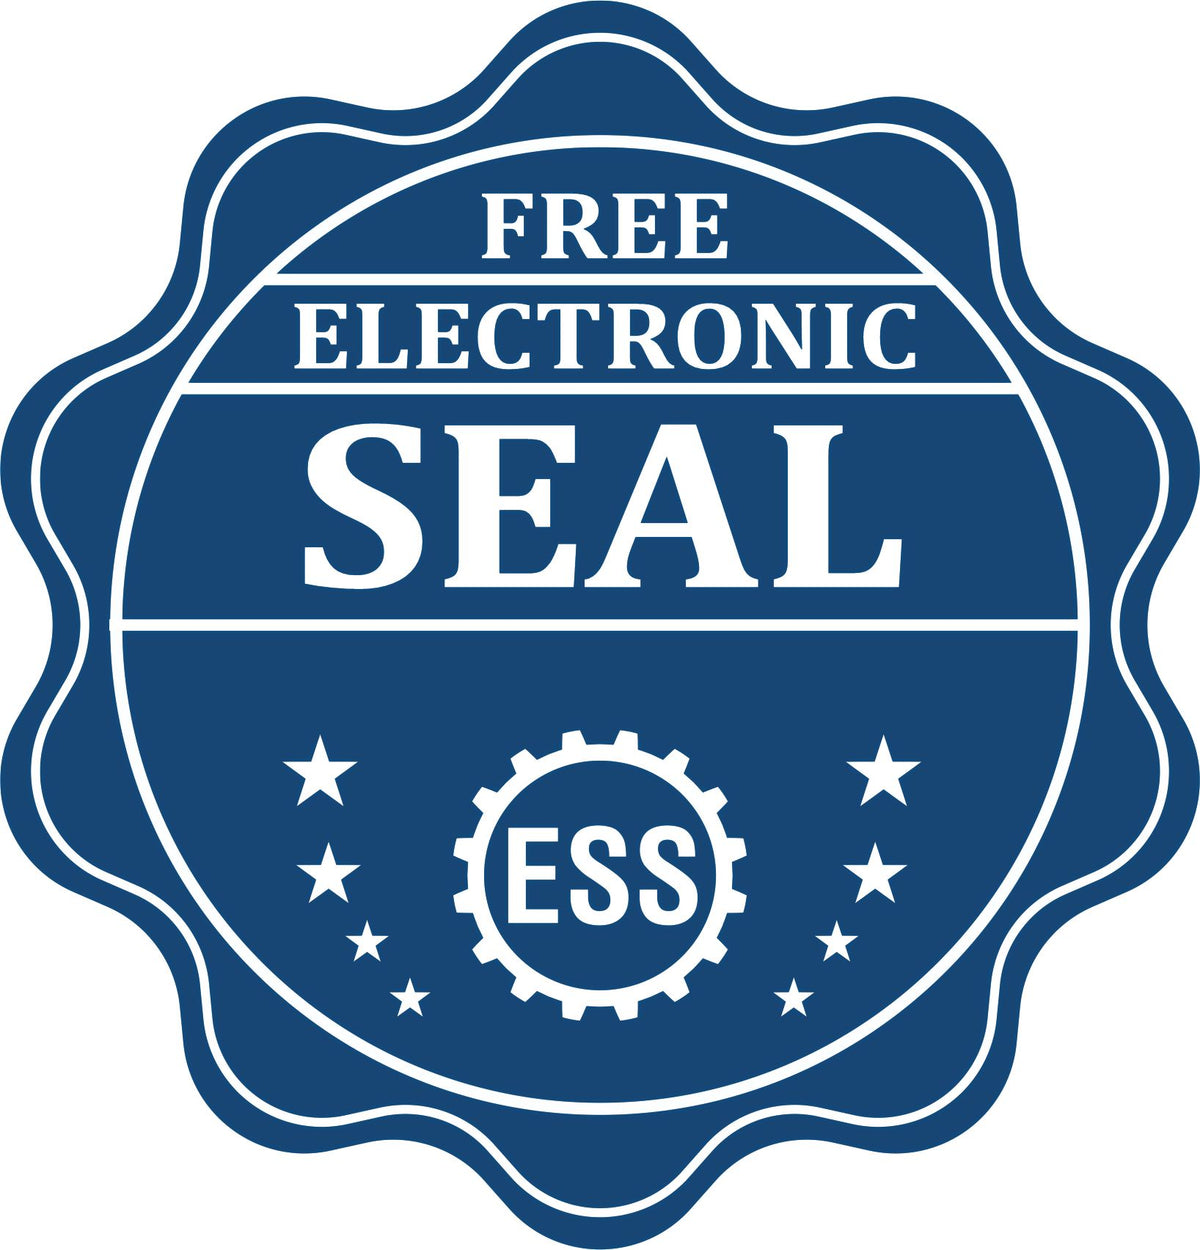 A badge showing a free electronic seal for the Gift Florida Geologist Seal with stars and the ESS gear on the emblem.